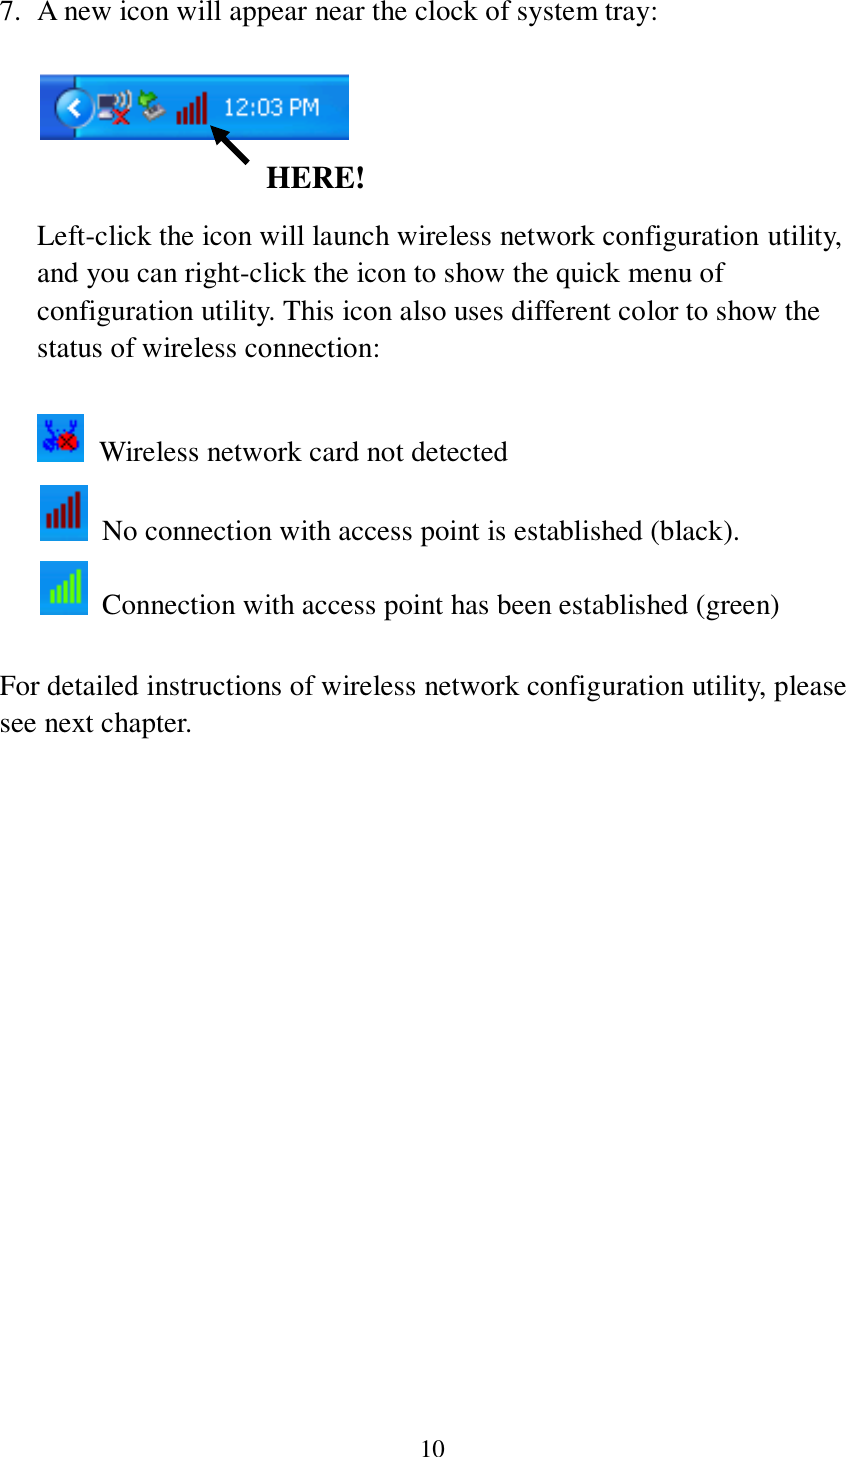 10  7. A new icon will appear near the clock of system tray:    Left-click the icon will launch wireless network configuration utility, and you can right-click the icon to show the quick menu of configuration utility. This icon also uses different color to show the status of wireless connection:    Wireless network card not detected   No connection with access point is established (black).   Connection with access point has been established (green)  For detailed instructions of wireless network configuration utility, please see next chapter.                HERE! 